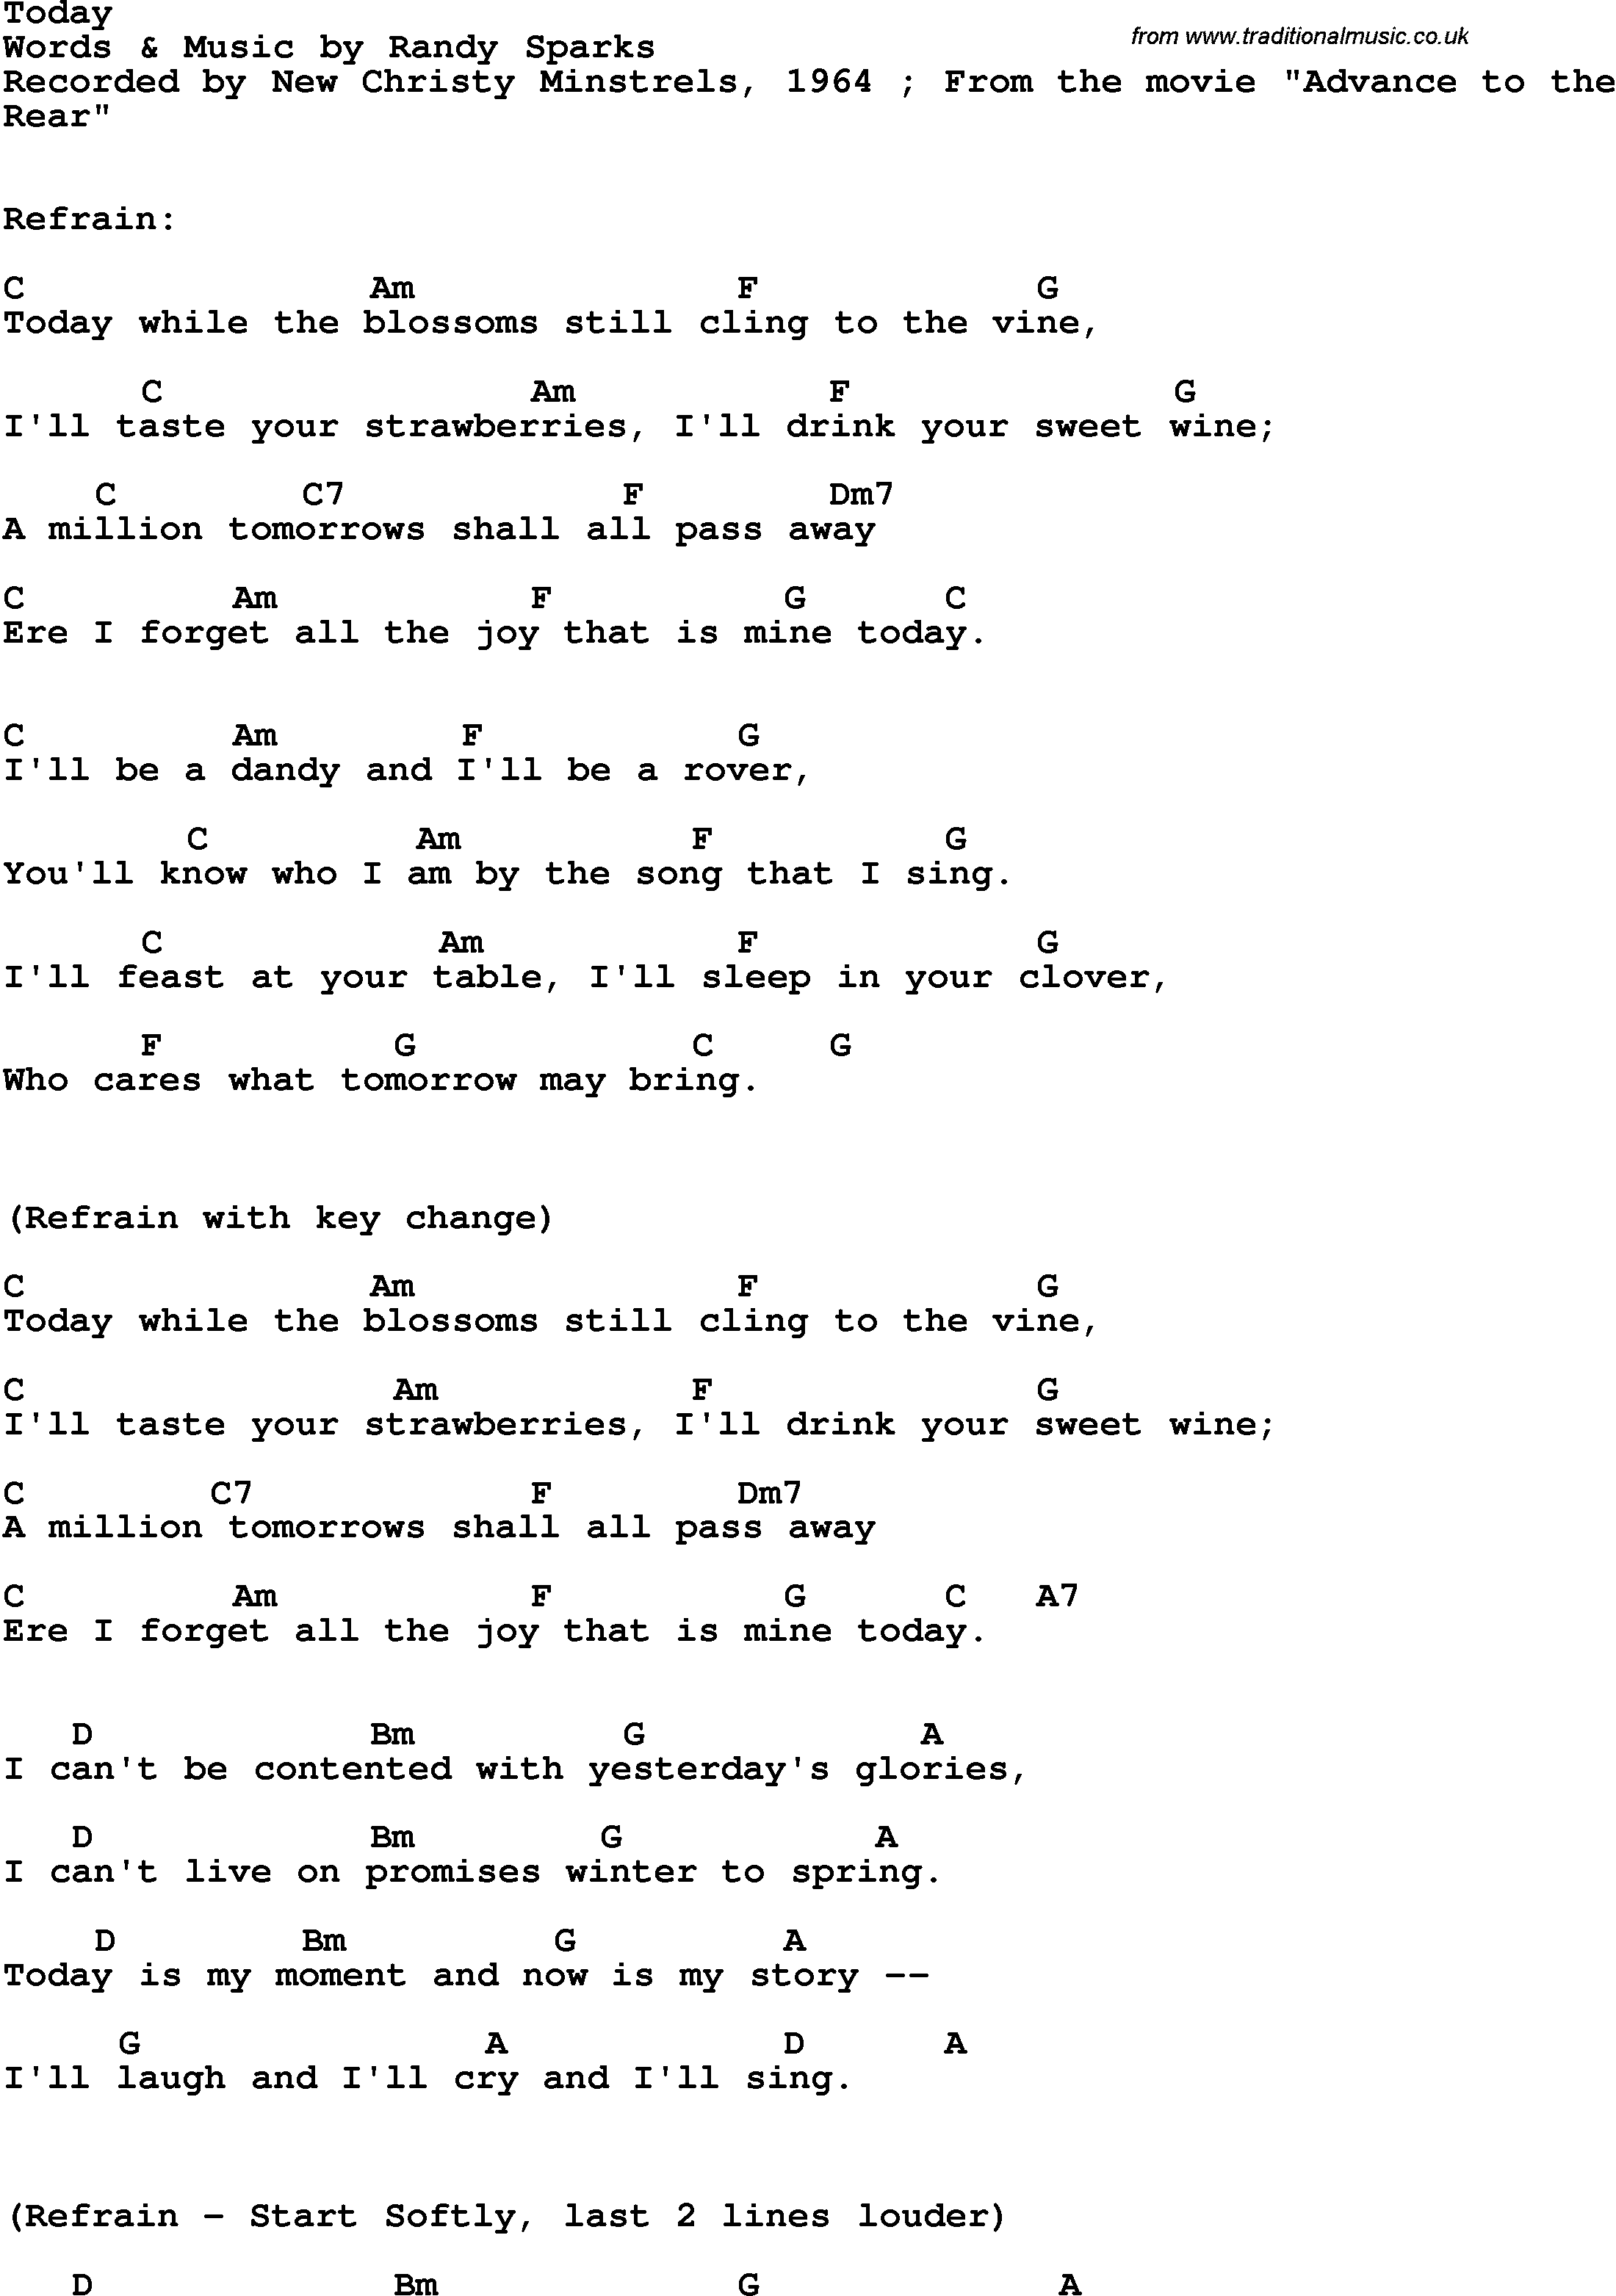 Song Lyrics with guitar chords for Today - The New Christy Minstrels, 1964